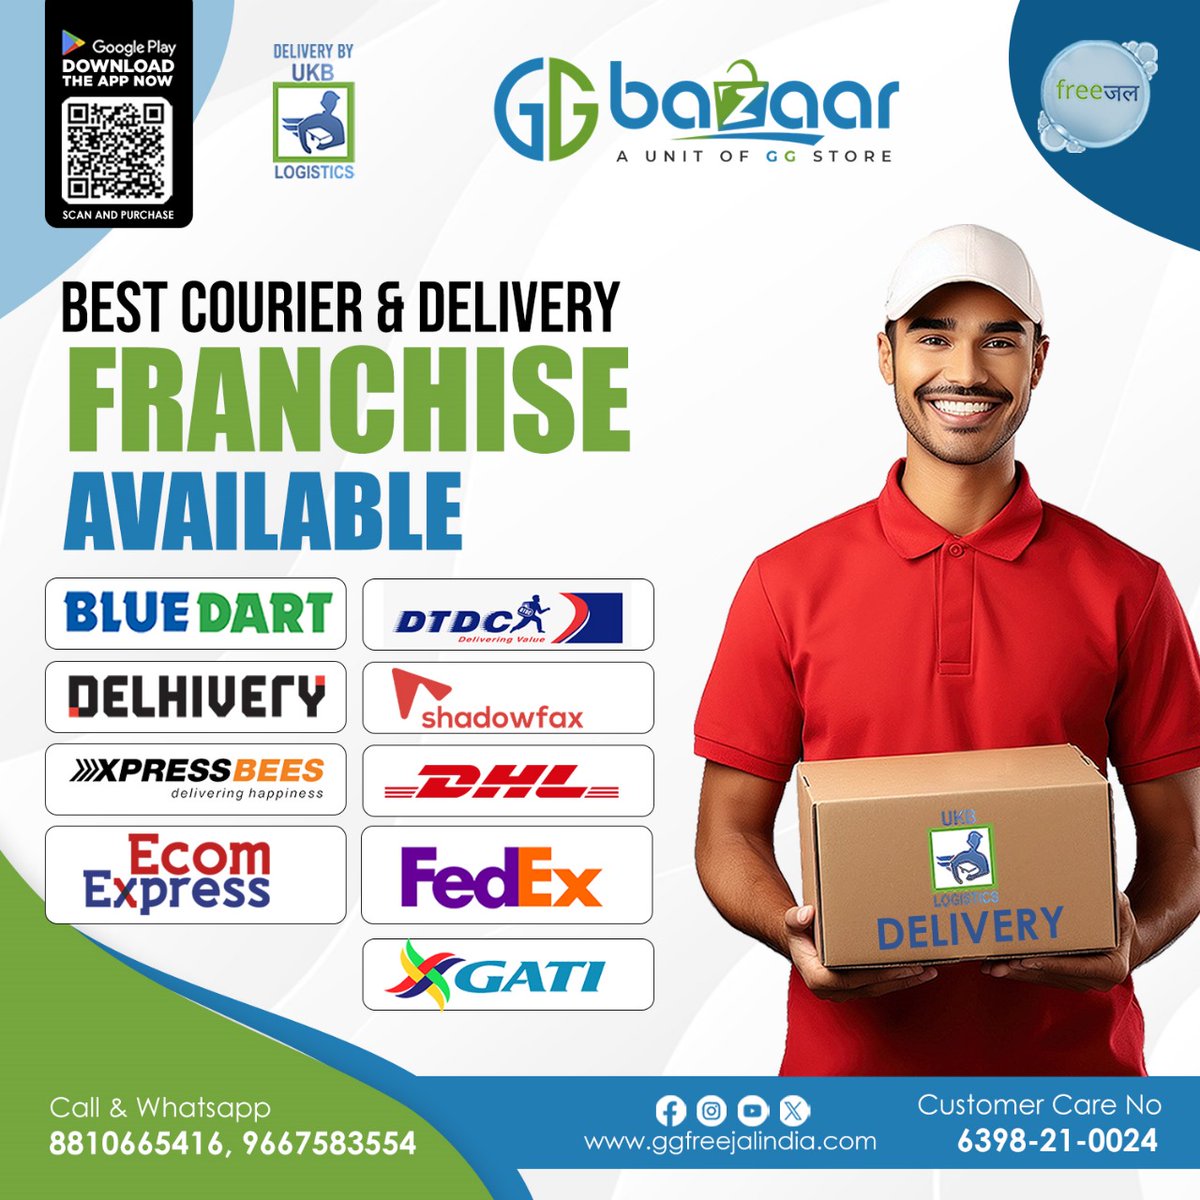 Looking for the best courier and delivery franchise opportunity? Look no further! The GGBazaar franchise offers a proven business model, comprehensive training, and ongoing support to help you succeed in the booming delivery industry. 
#ggbazaar #deliveryservice #courier